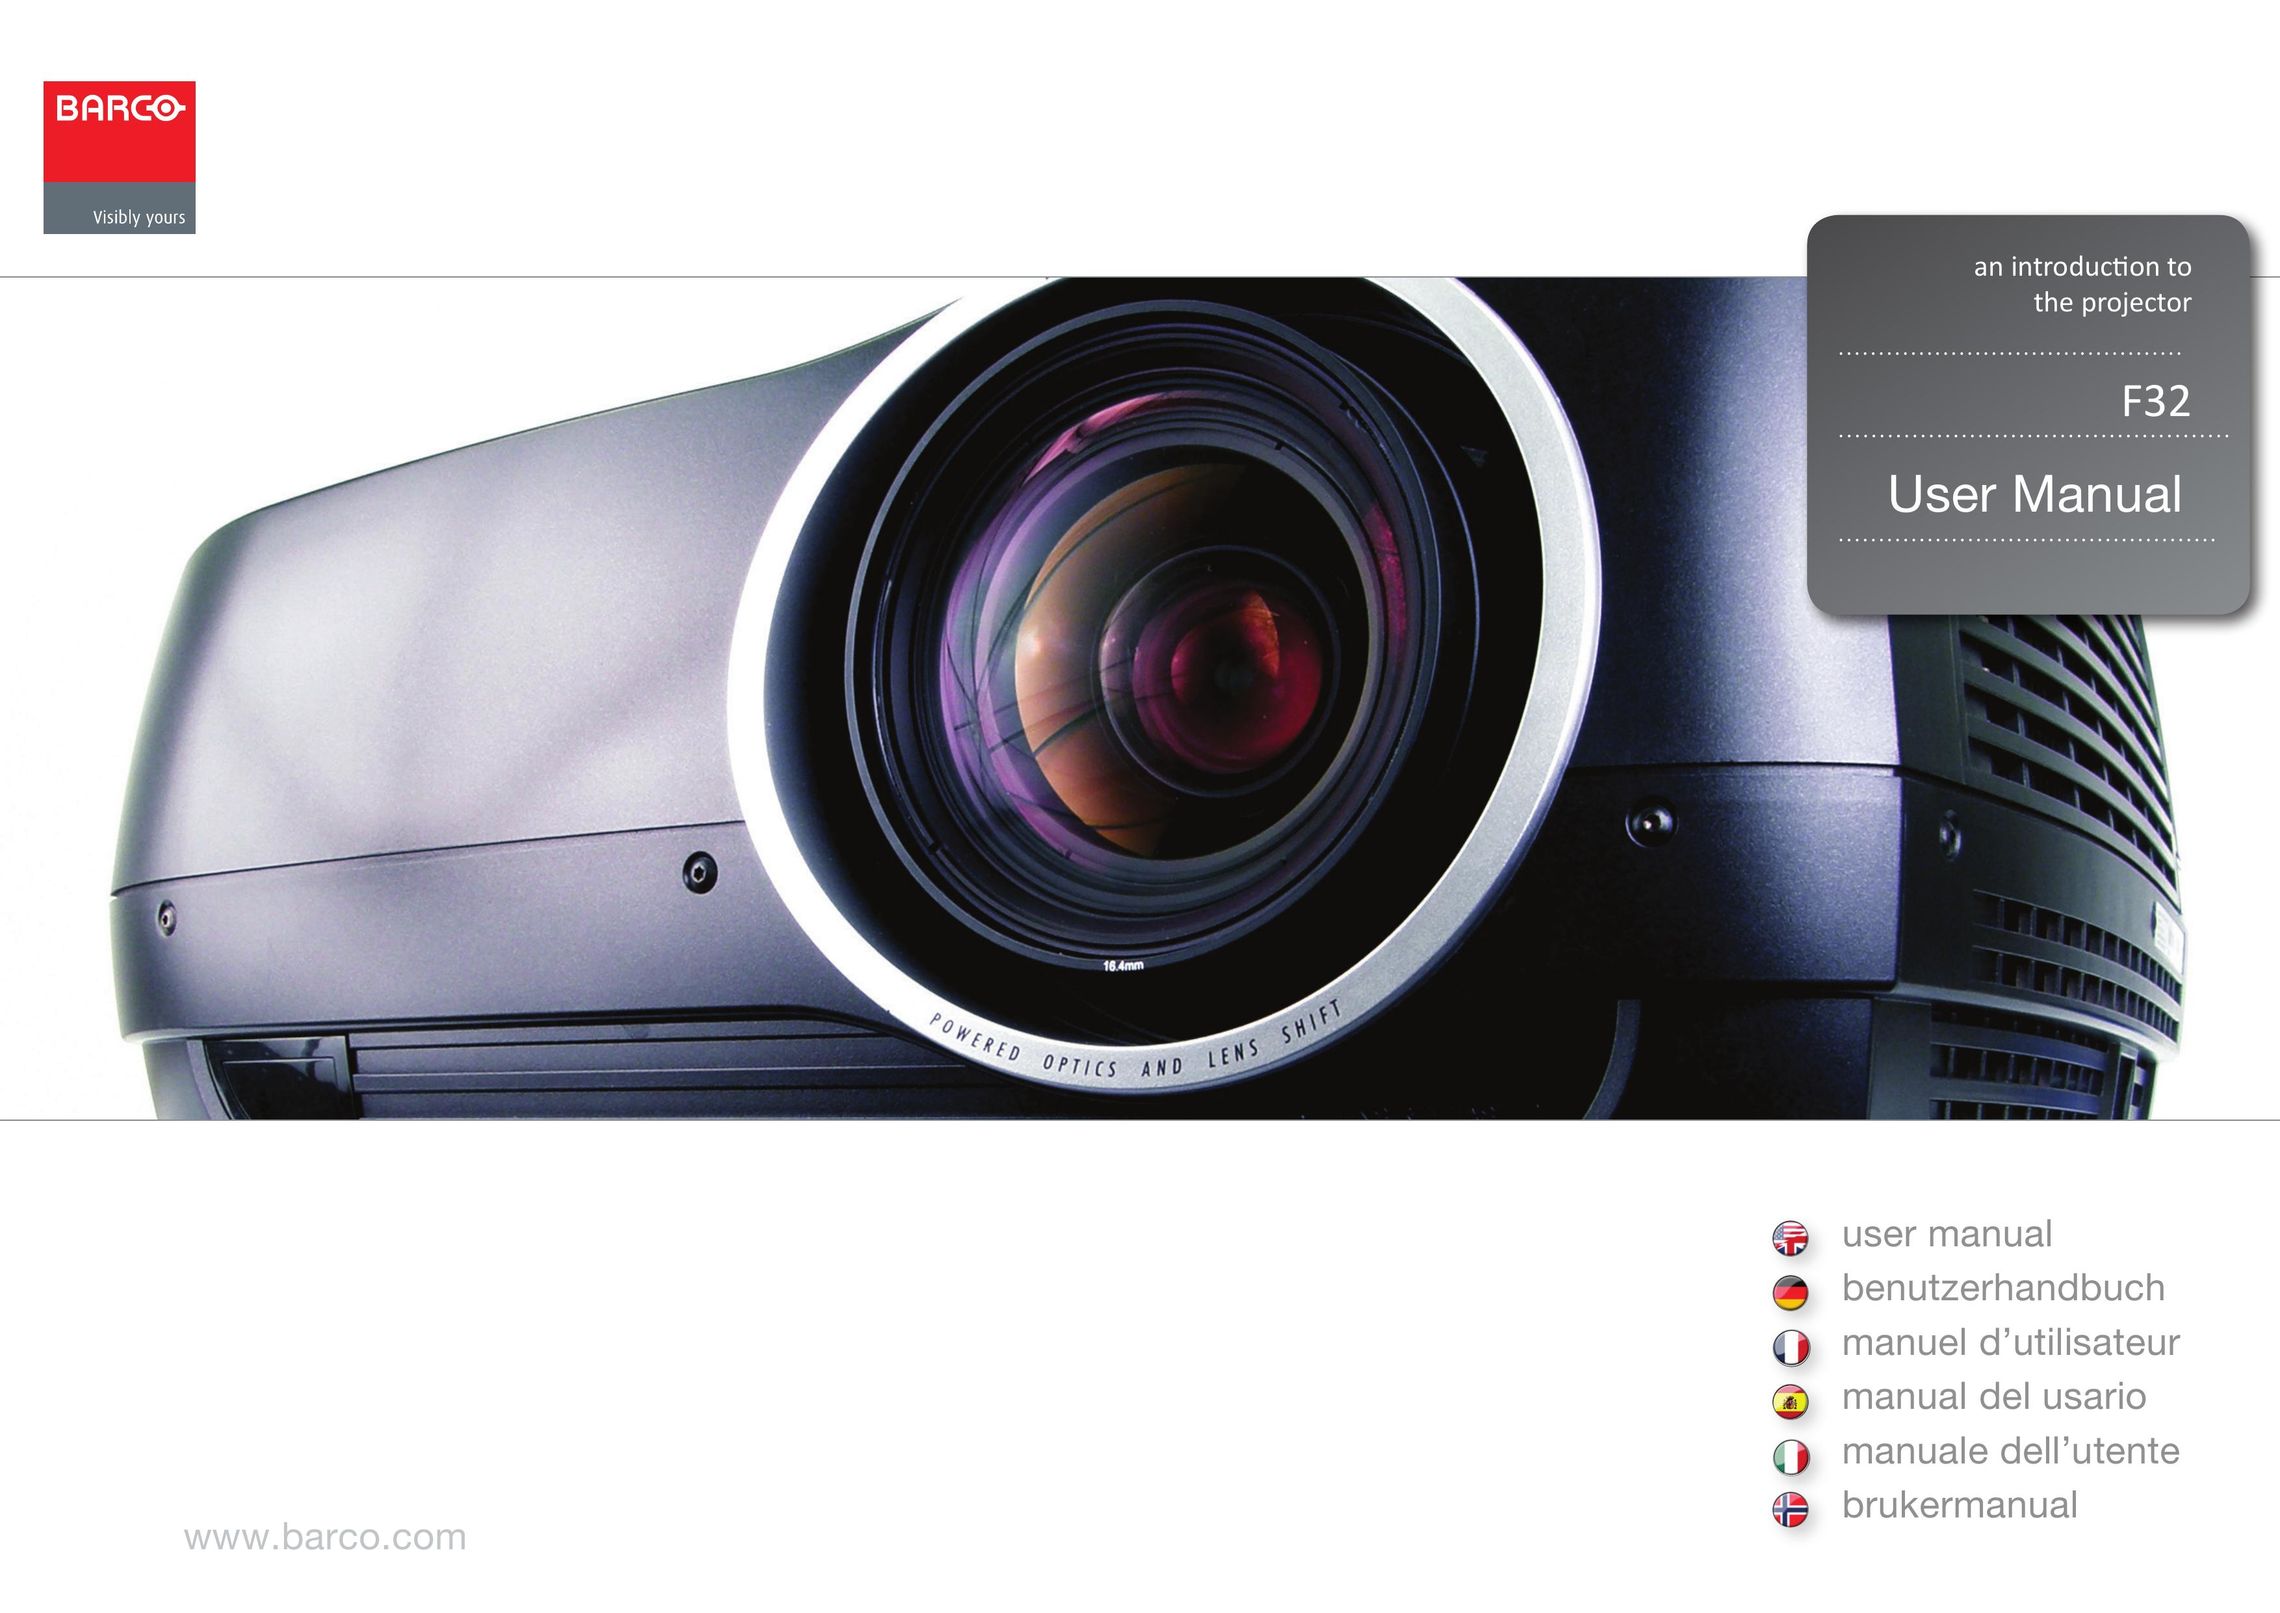 Barco F32 Projector User Manual